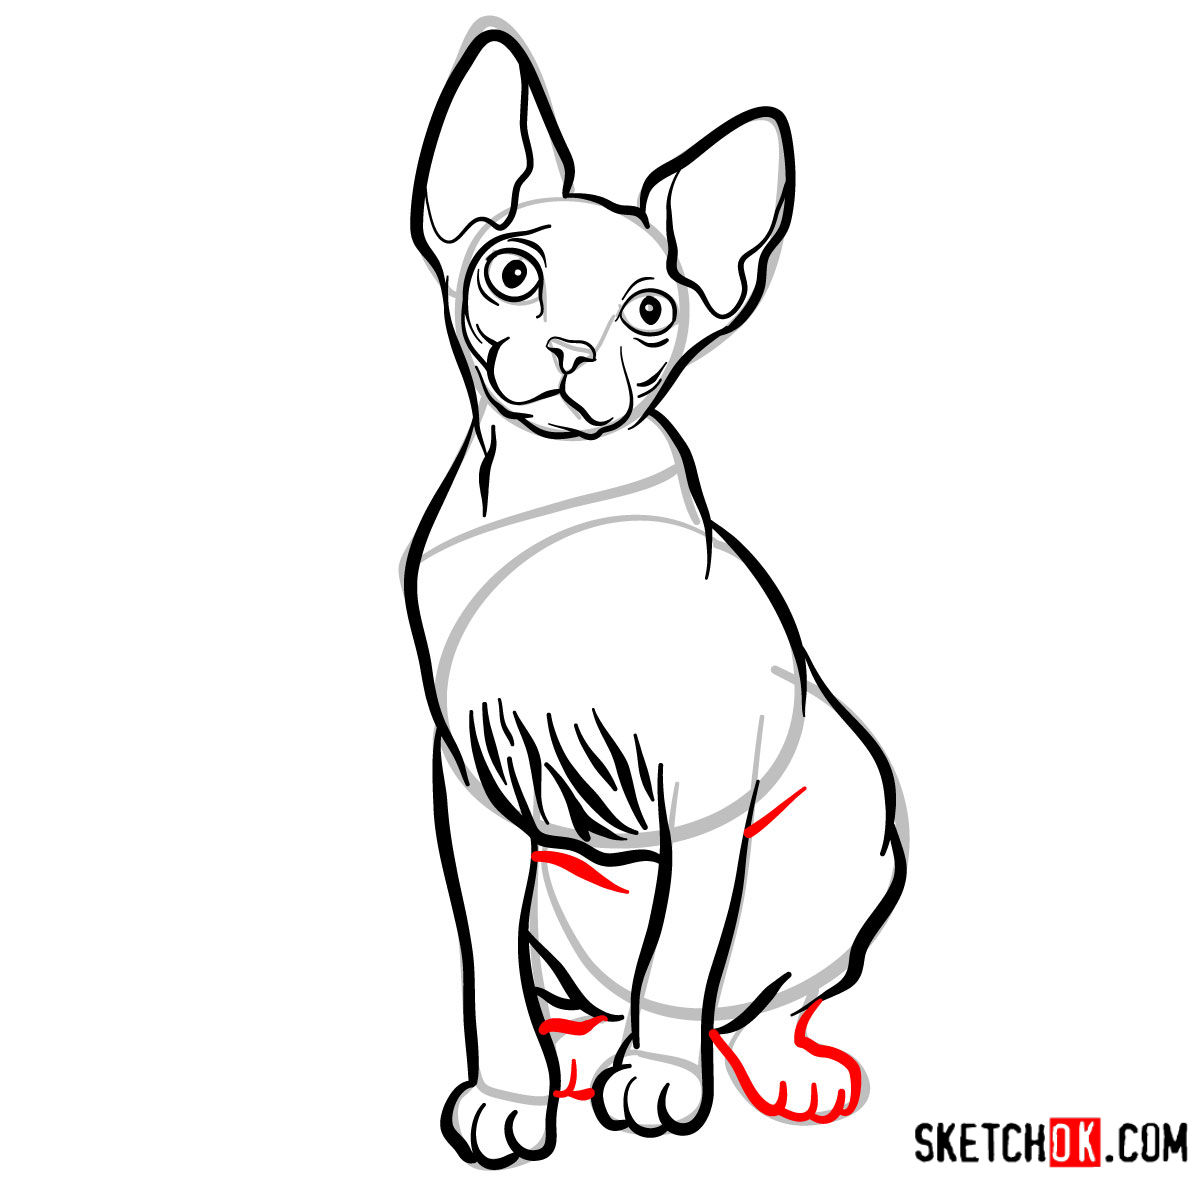 How to draw the Sphynx cat - step 11